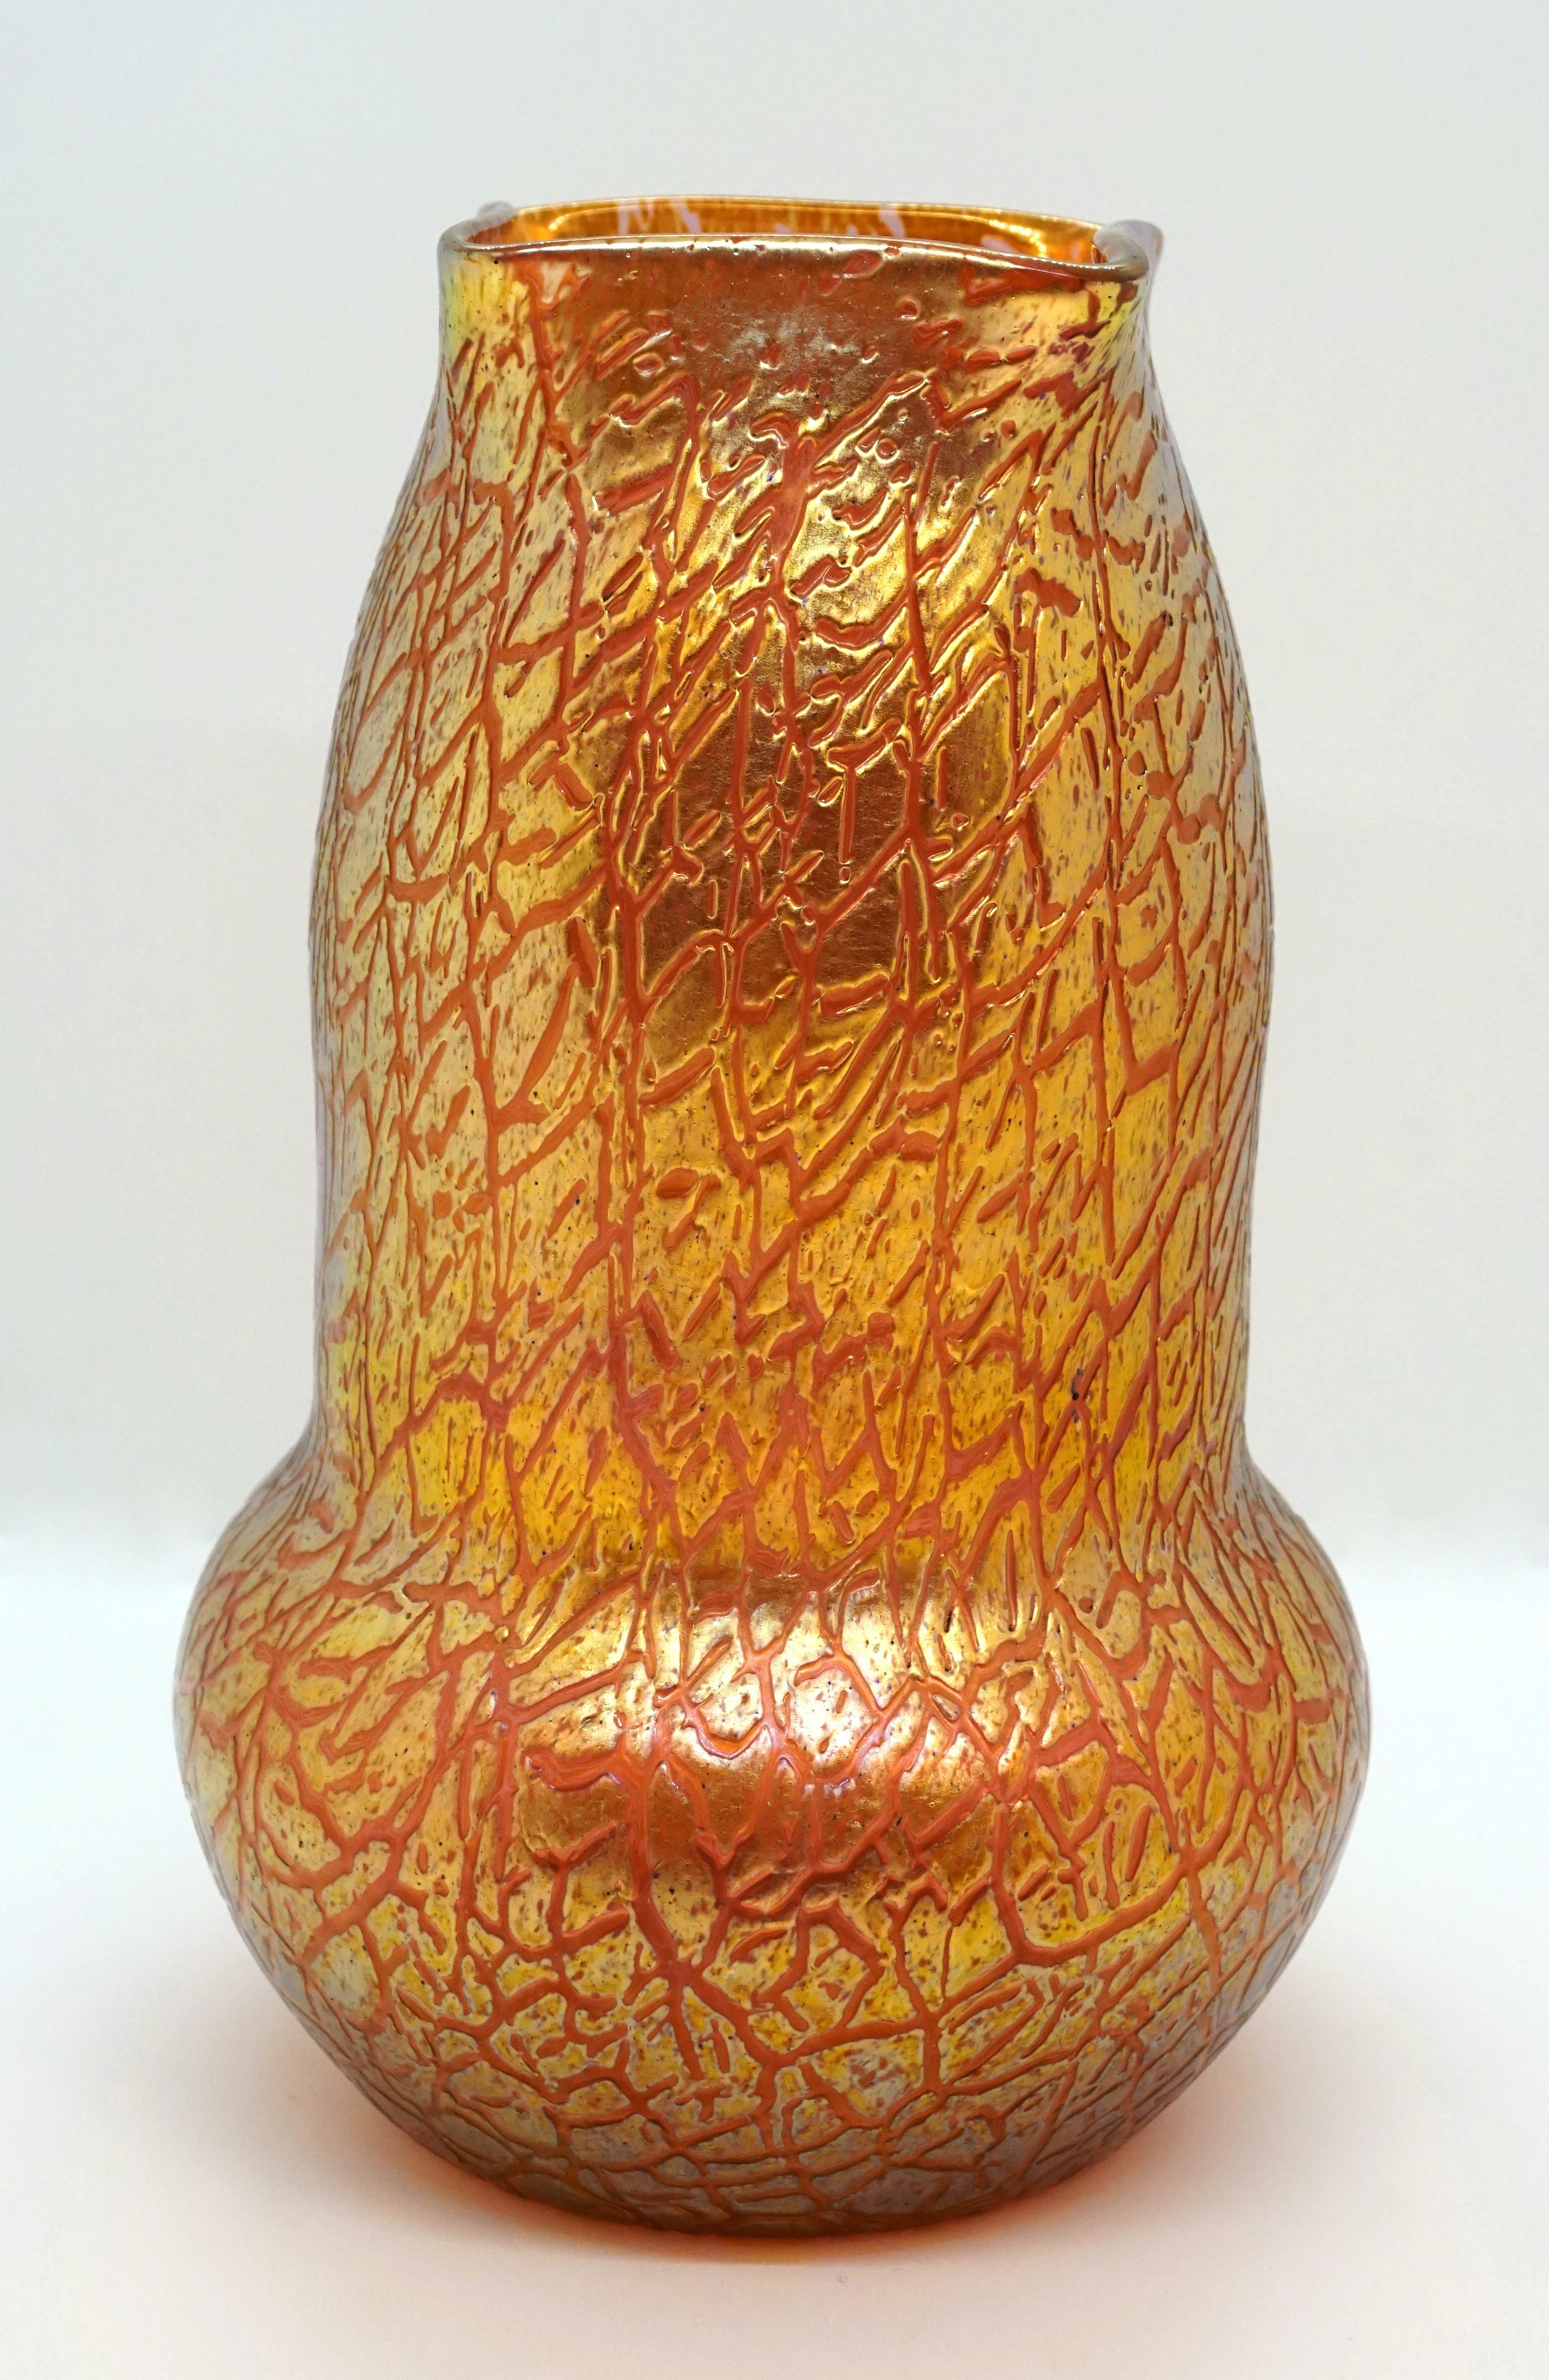 Finest Bohemian Art Nouveau glass vase

Blown, bulbous body on a round floor plan with a wide neck, narrowed at the top and indented four times to create a square opening on the lip rim

Shape: Series II (5000-series) circa 1907

Decor: